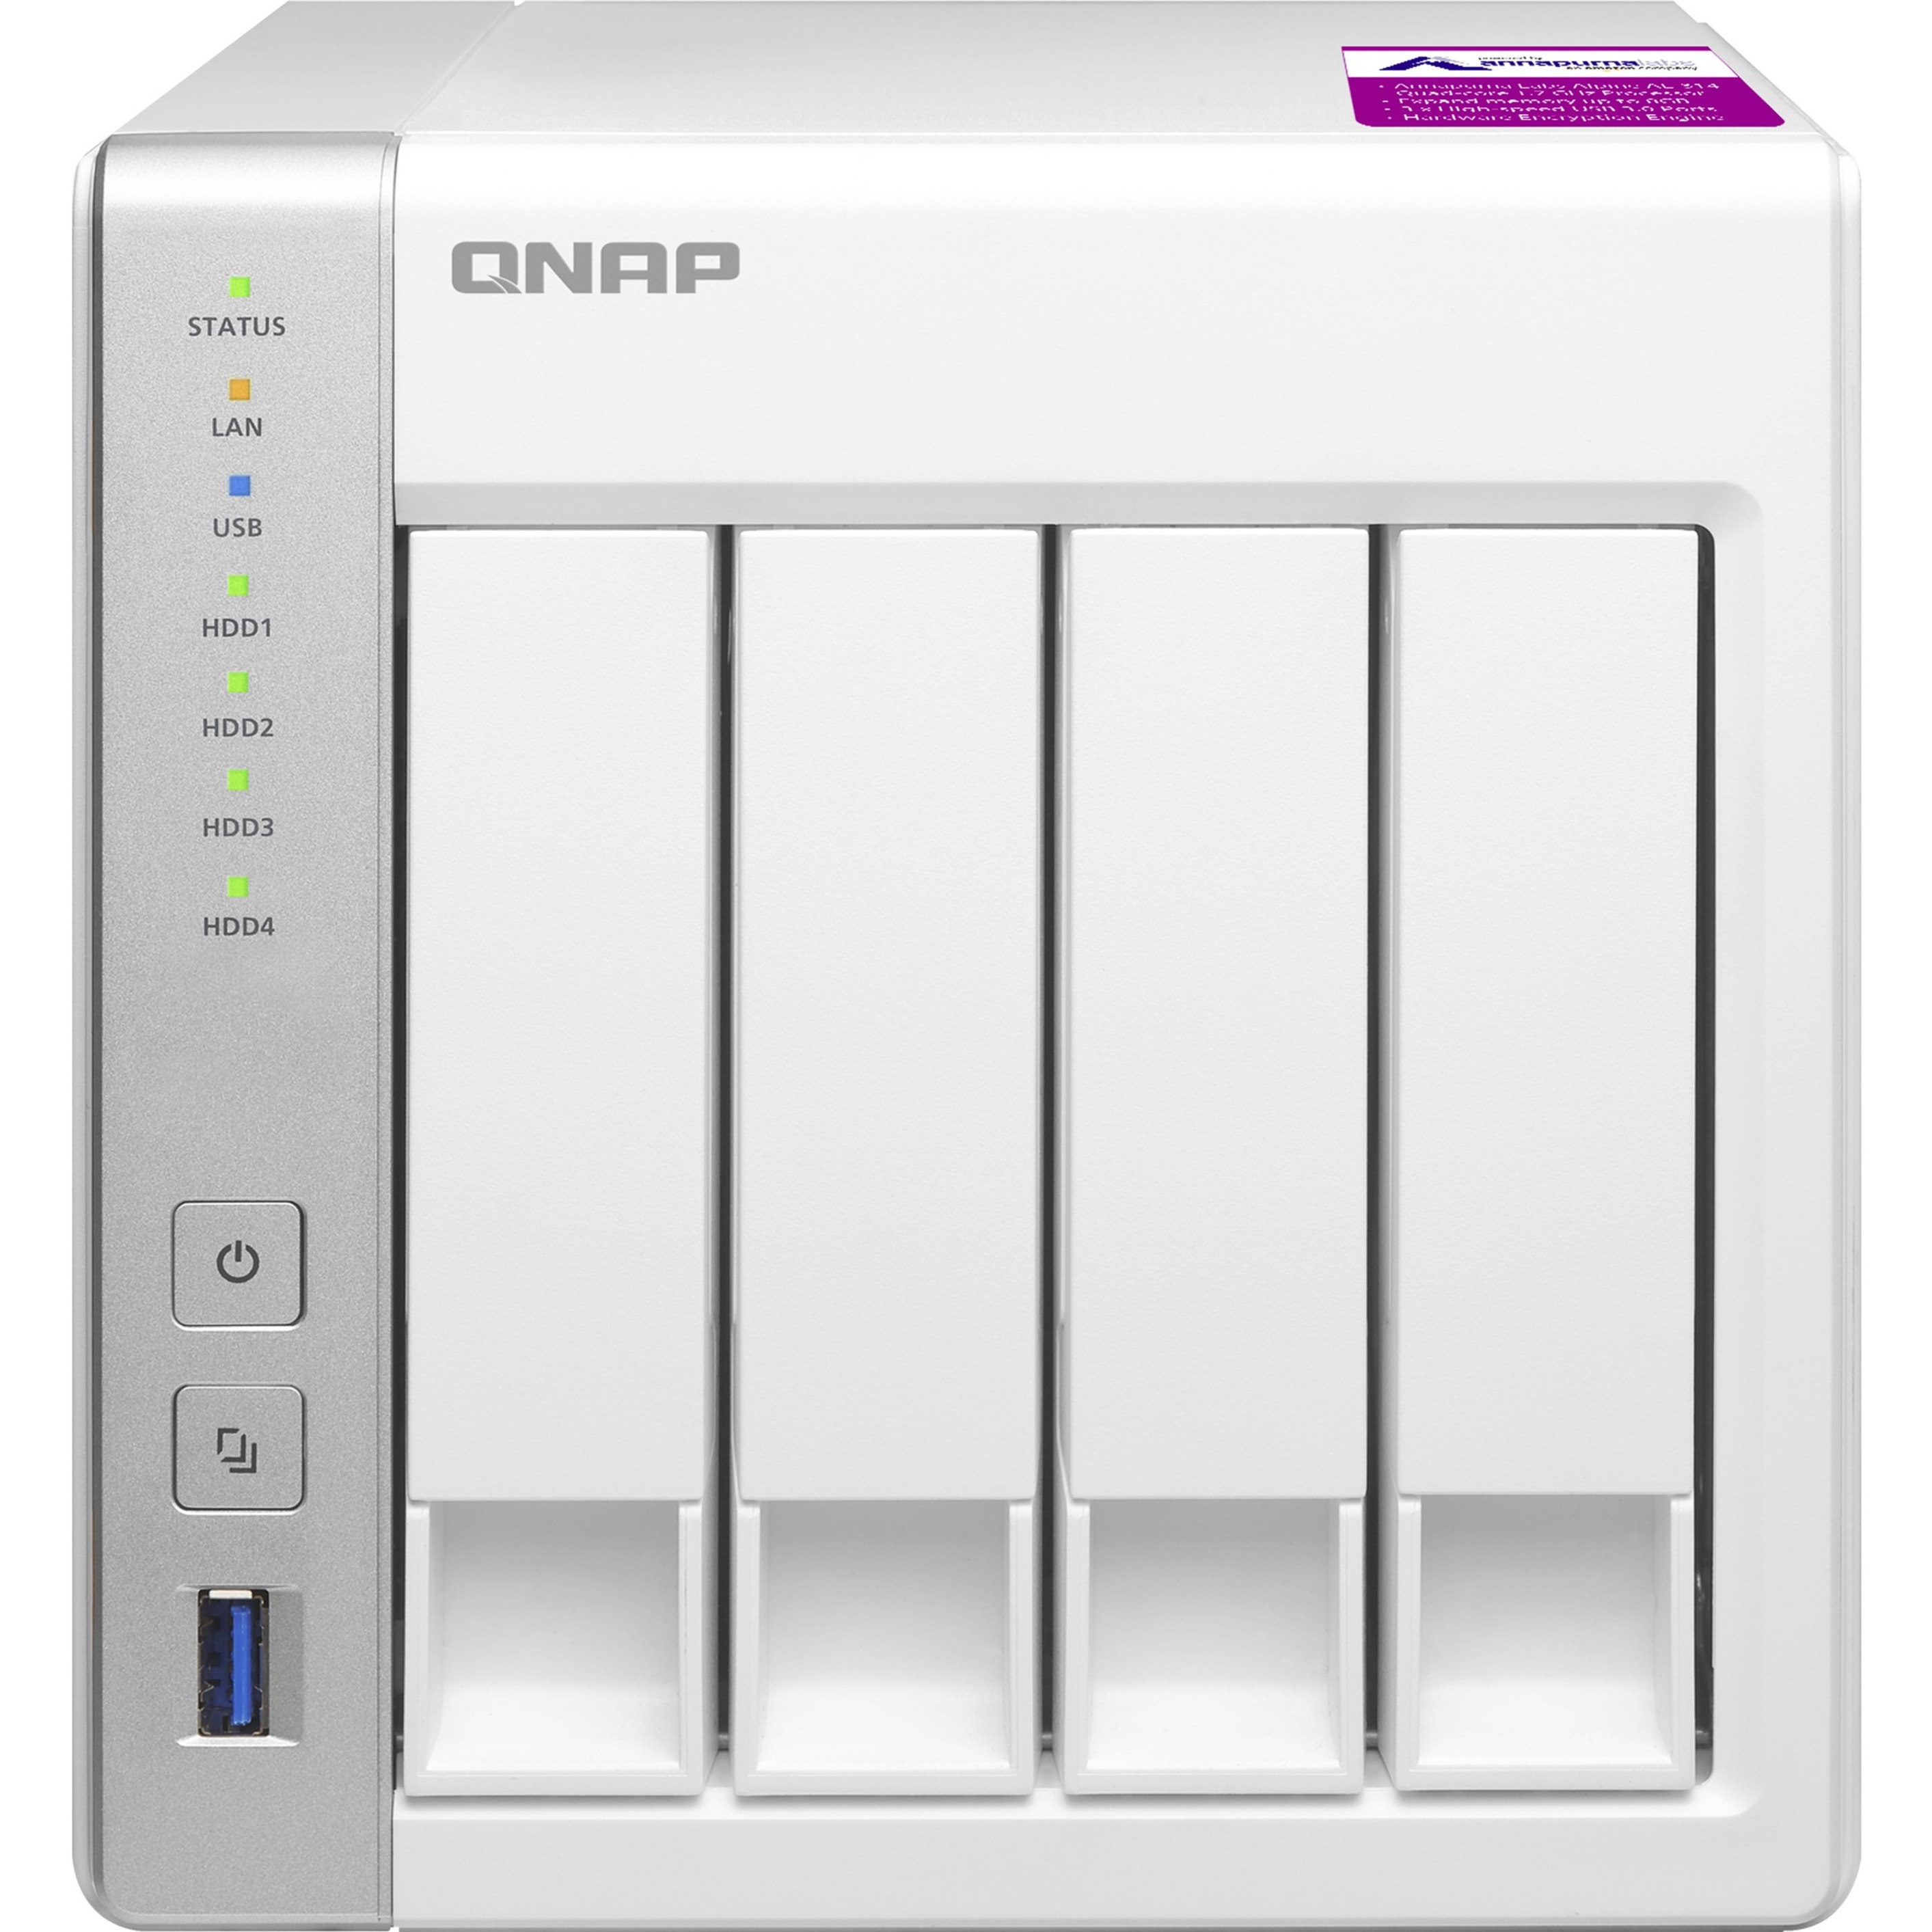 QNAP TS-431P2 4-bay Personal Cloud NAS with DLNA, 1GB RAM - image 3 of 9